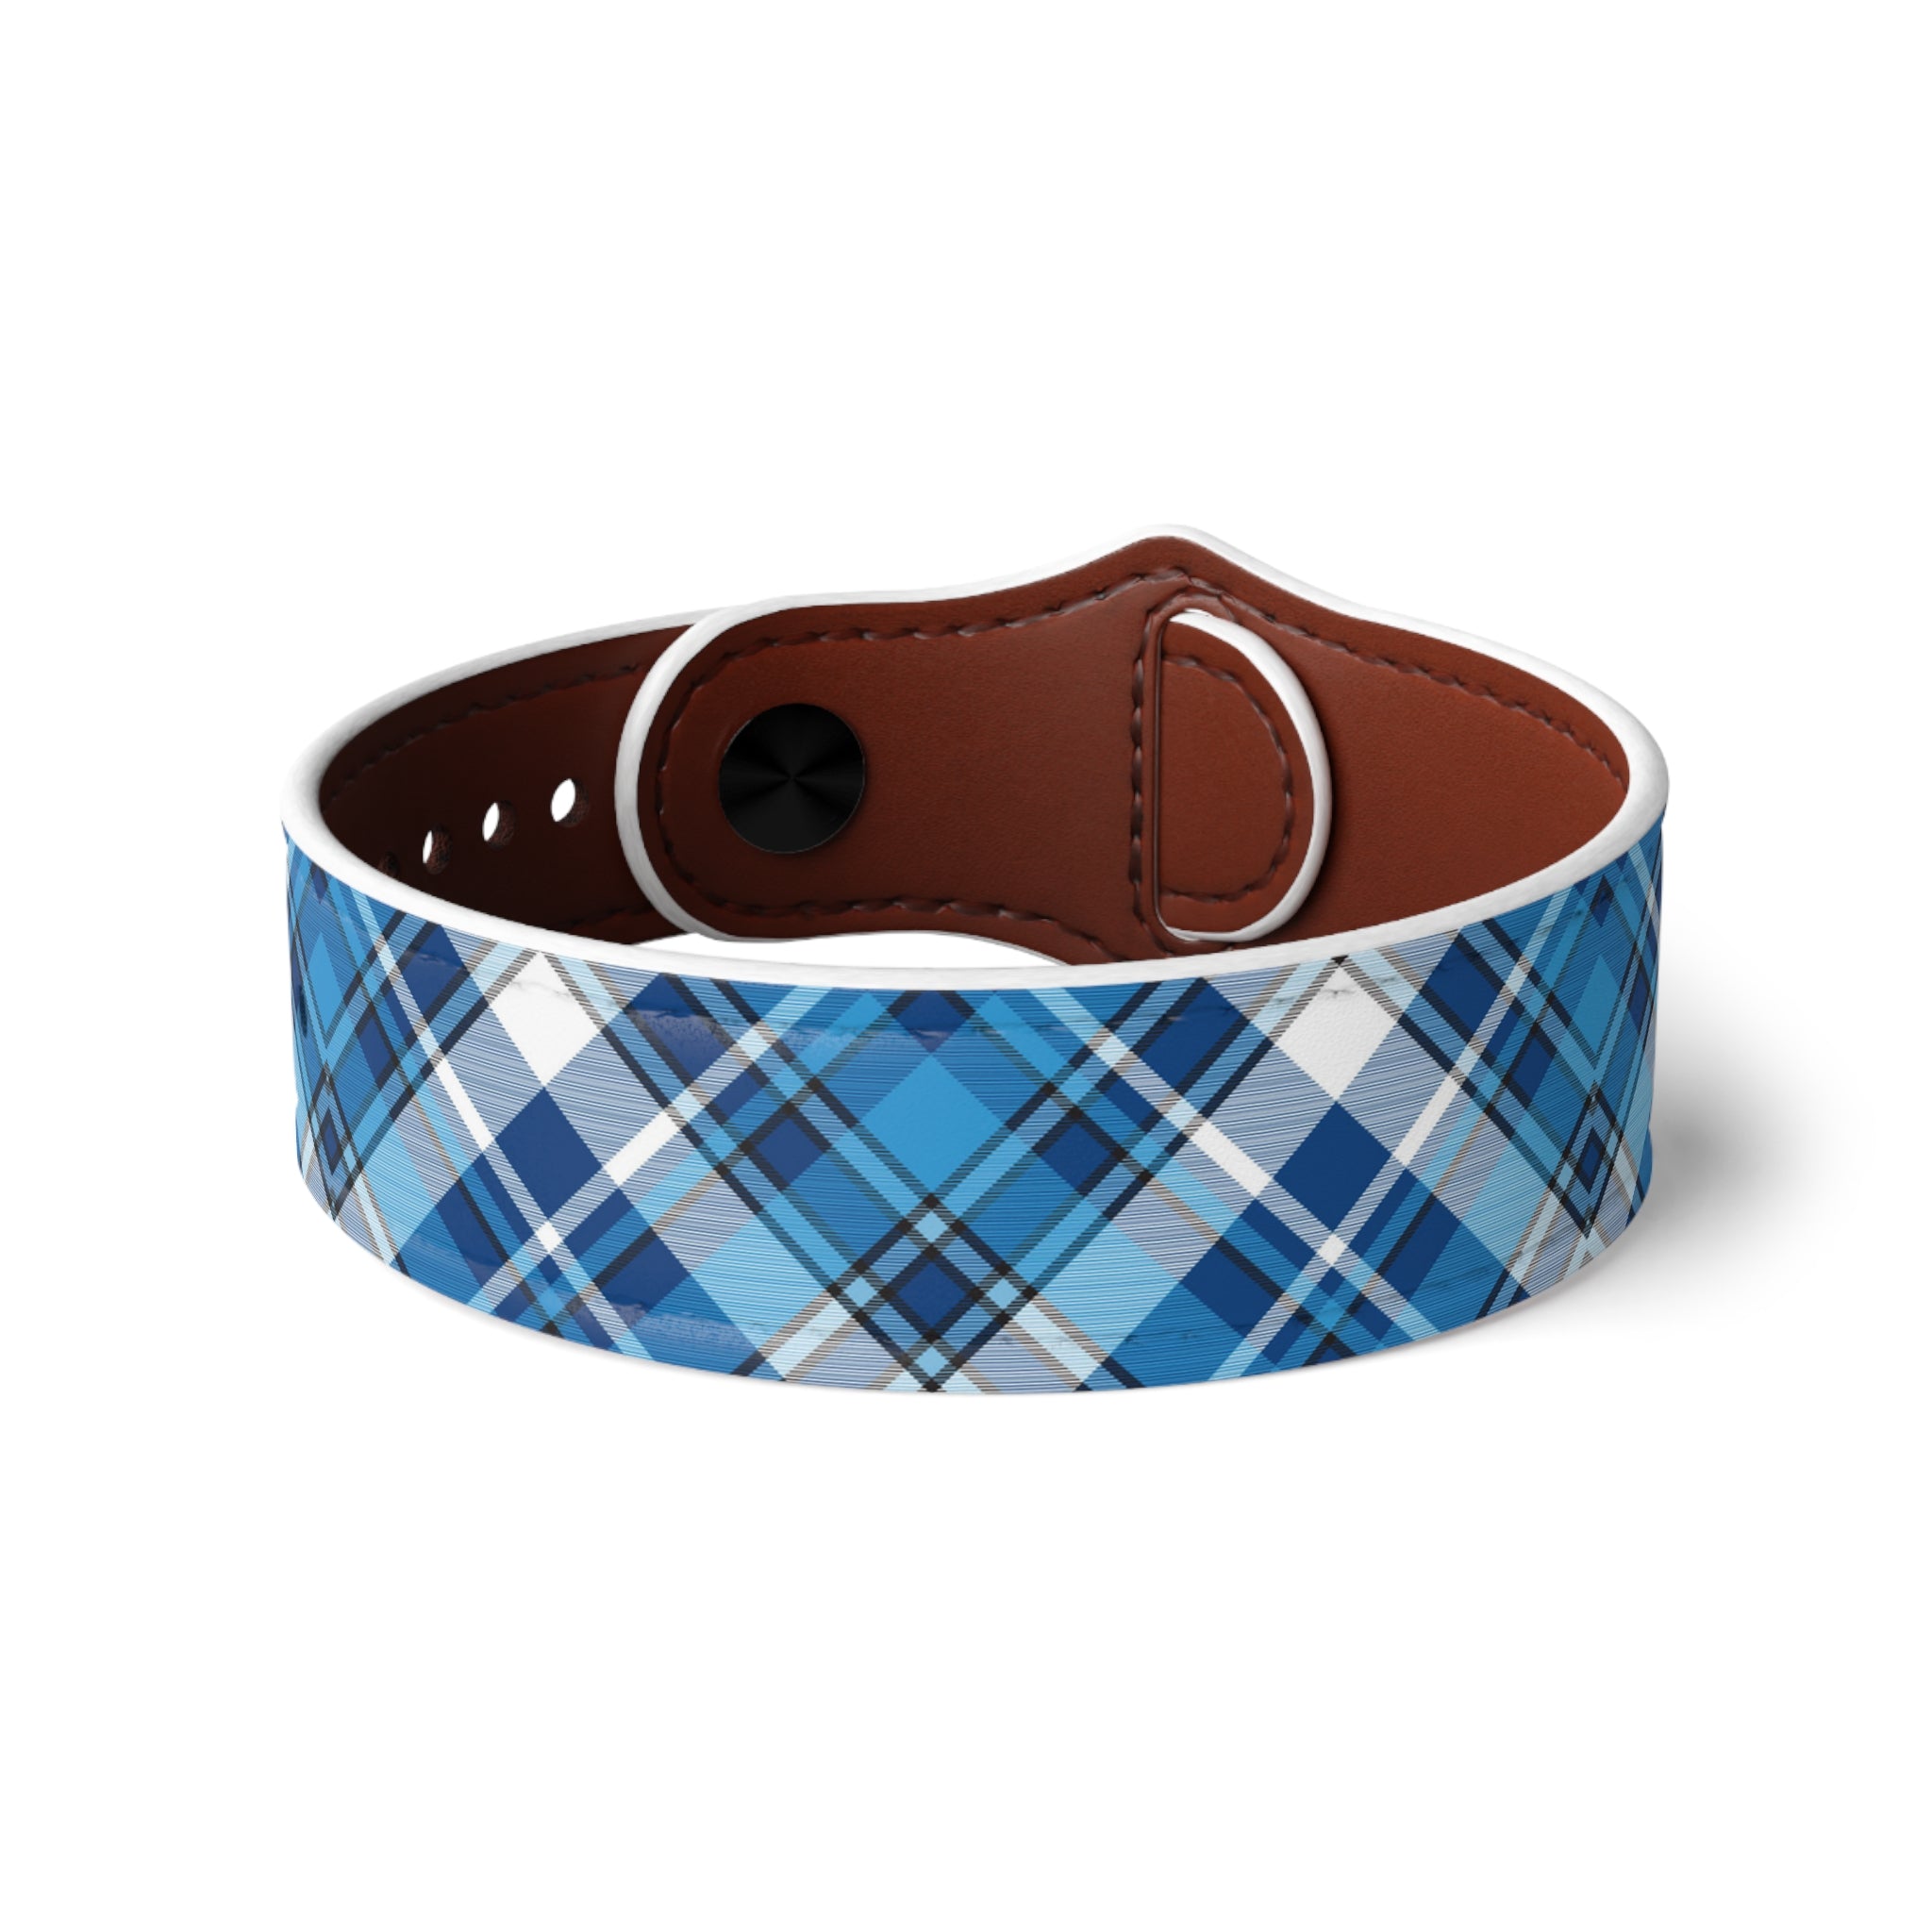 Casual Wear Accessories in Blue Plaid Faux Leather Wristband, Unisex Leather Bracelet, Faux Leather Cuff, Unisex Accessories